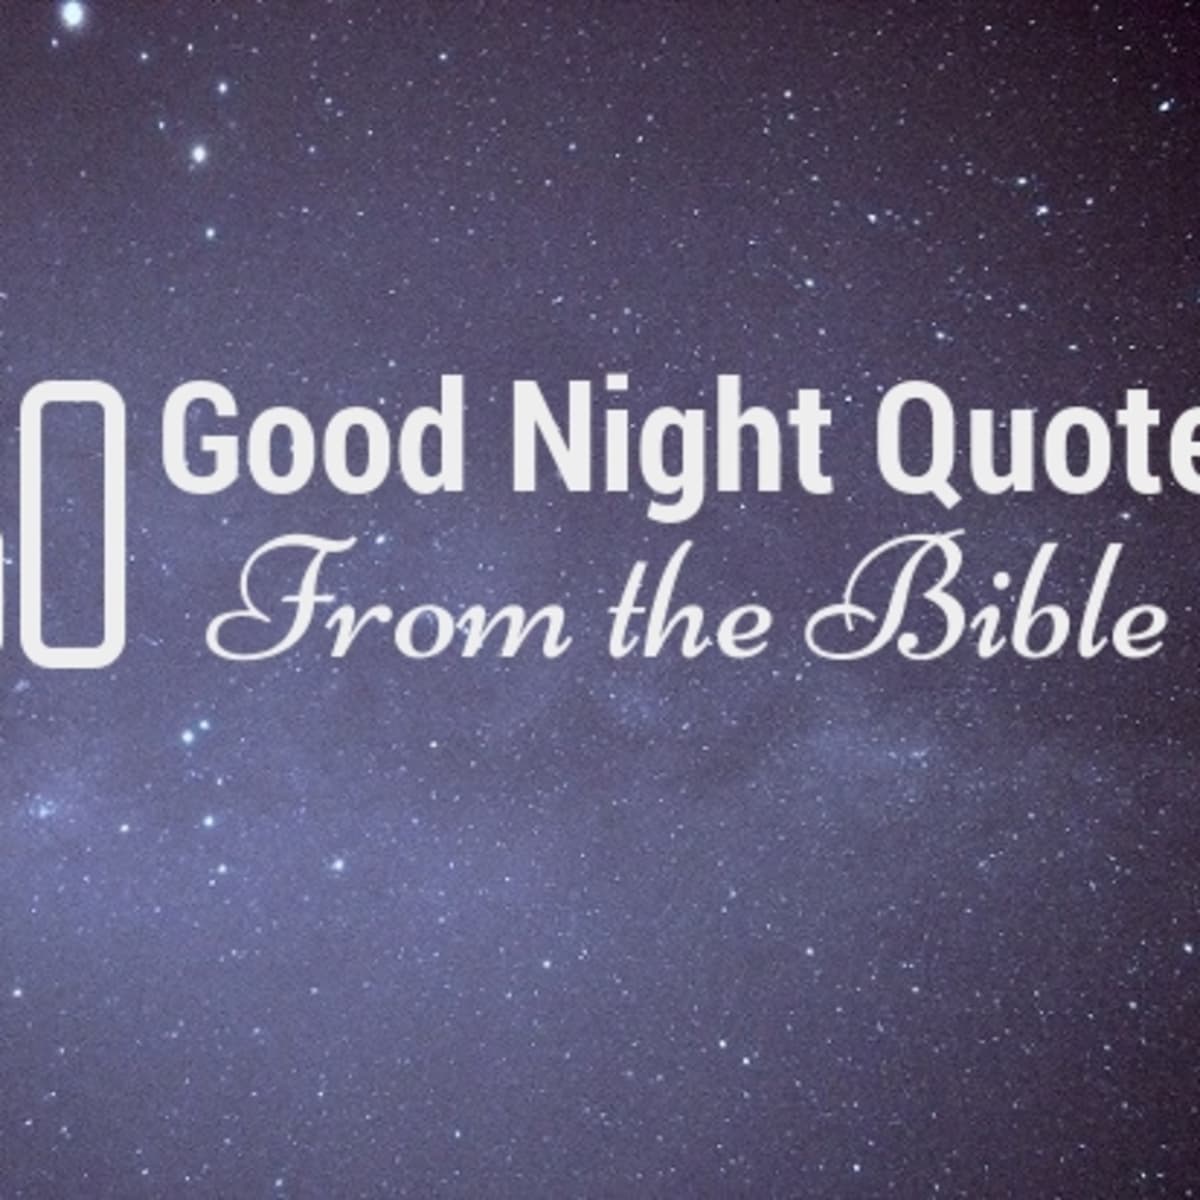 50 Good Night Quotes From the Bible - LetterPile